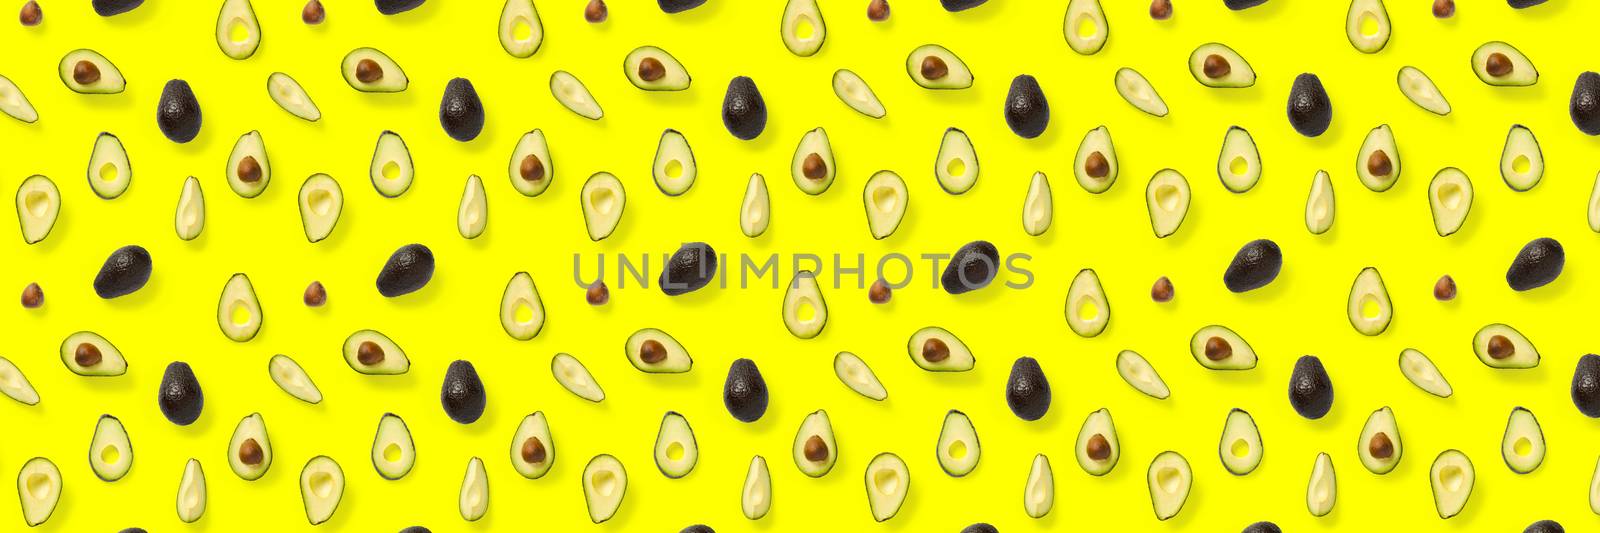 Avocado banner. Background made from isolated Avocado pieces on yellow background. Flat lay of fresh ripe avocados and avacado pieces. by PhotoTime